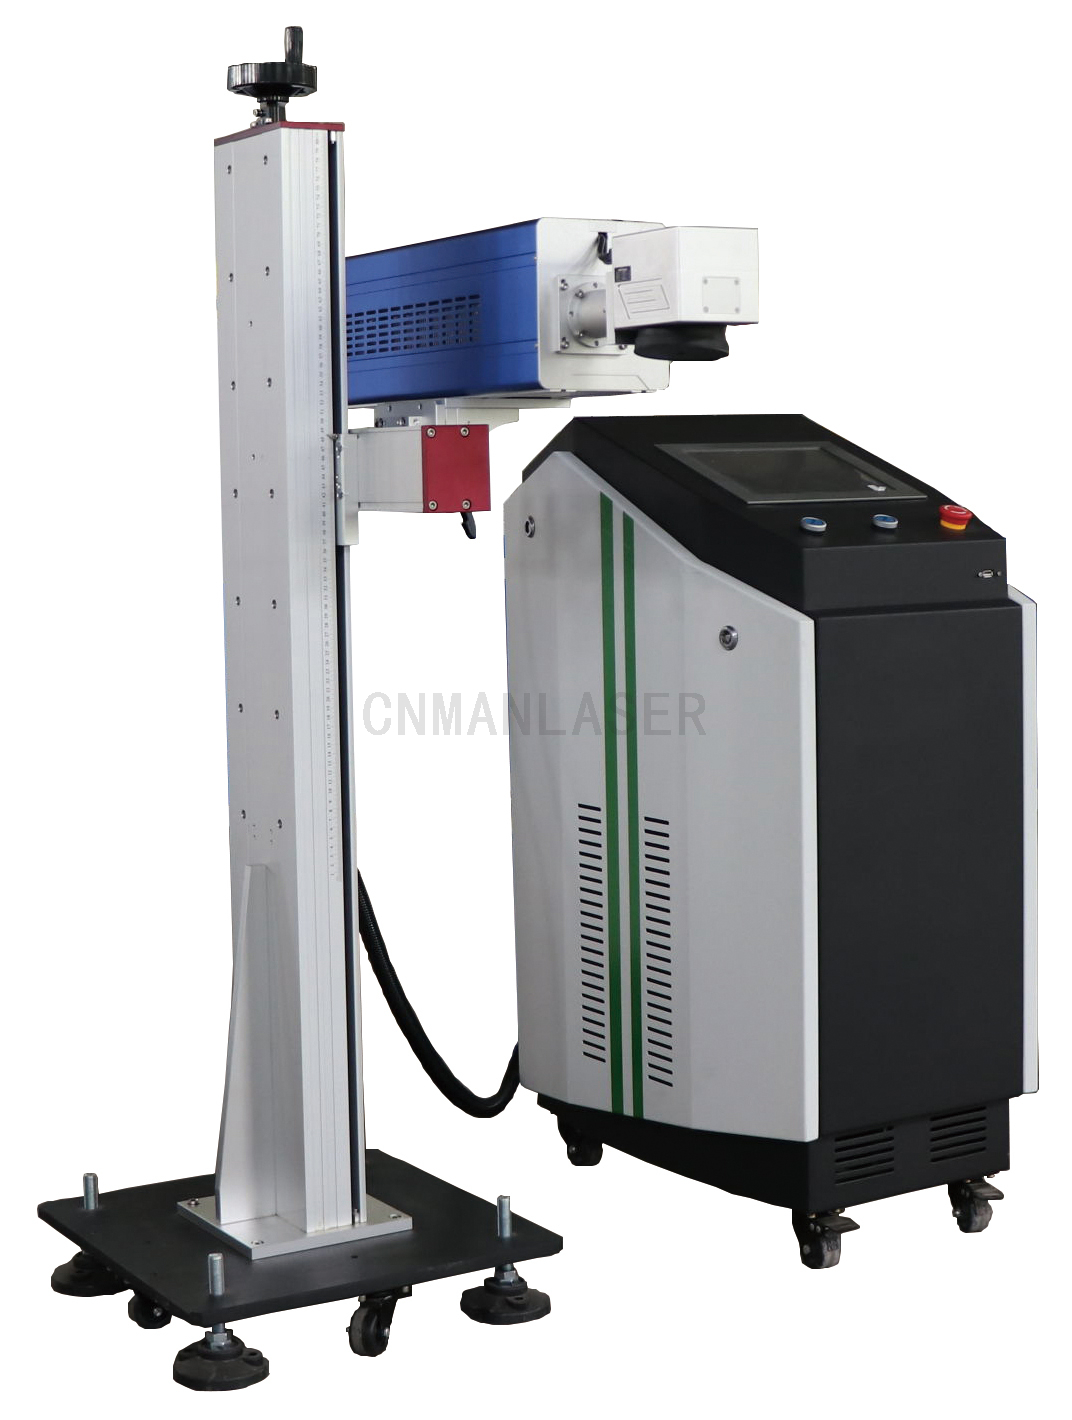 High-Performance Online Fly CO2 Laser Marking Machine for Engraving